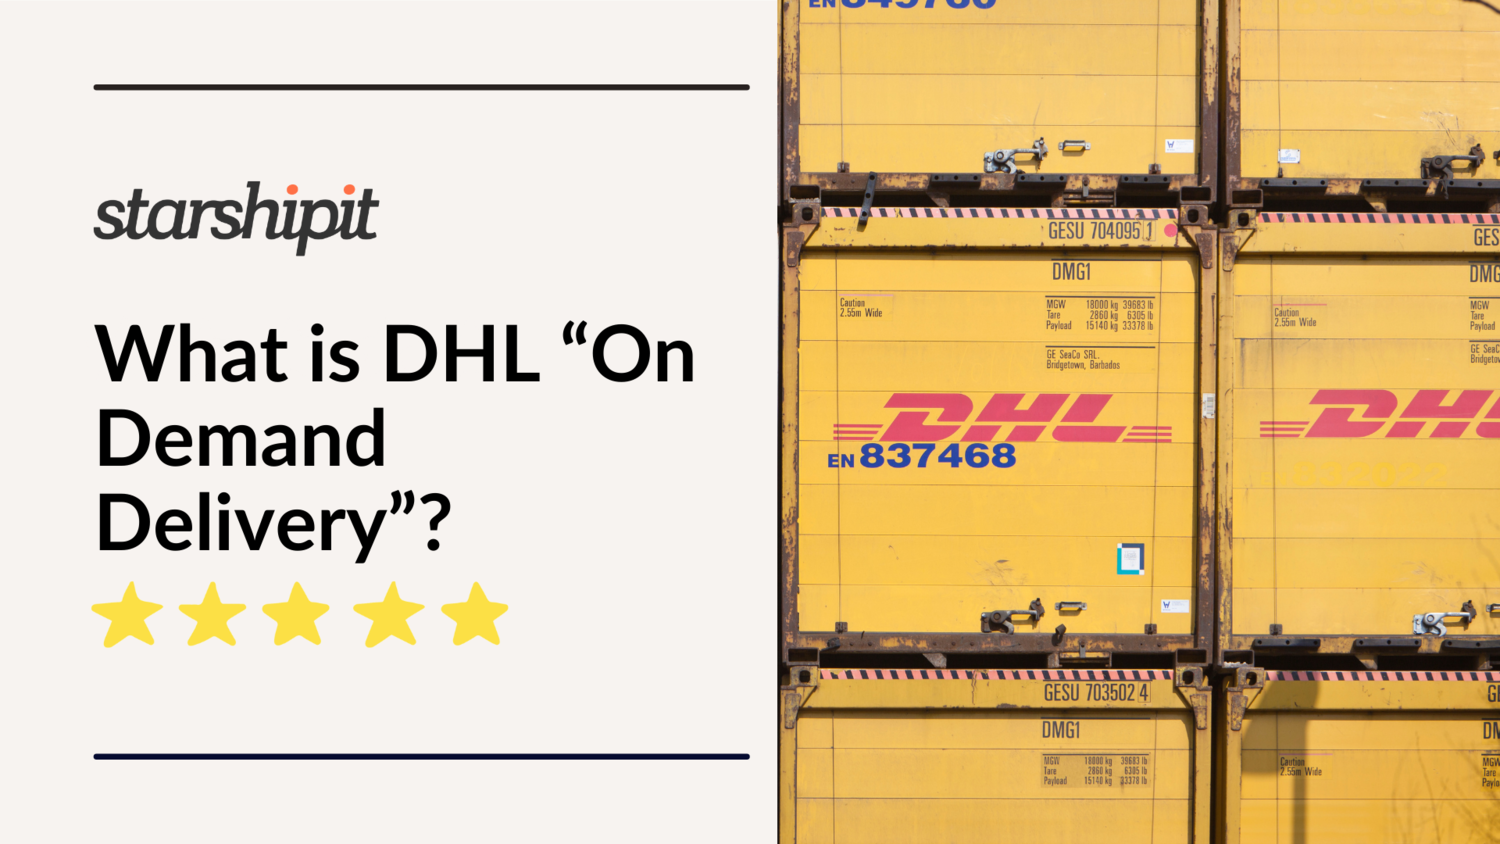 What is DHL on-demand delivery? | Starshipit